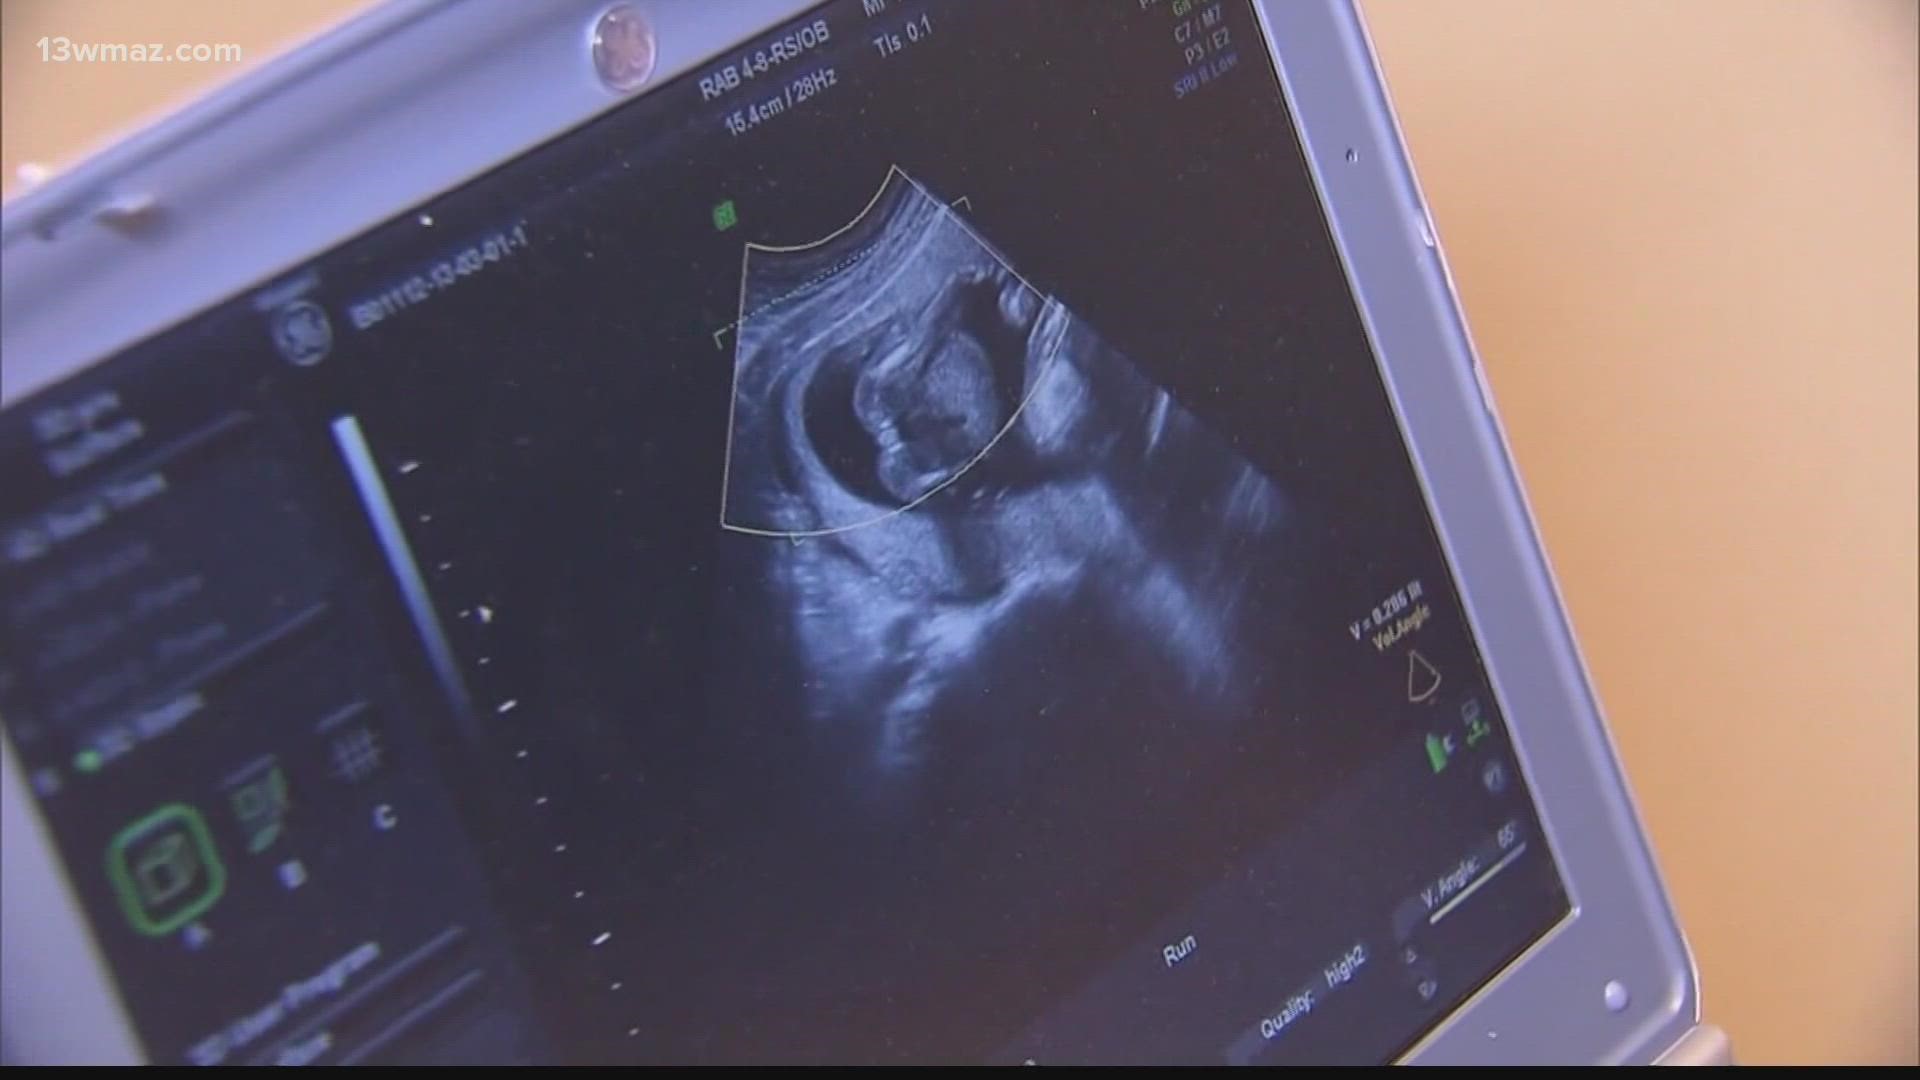 40 percent of the people who filled out our 13WMAZ Listening Lab survey in October said abortion is one of the top issues they want to hear politicians address.